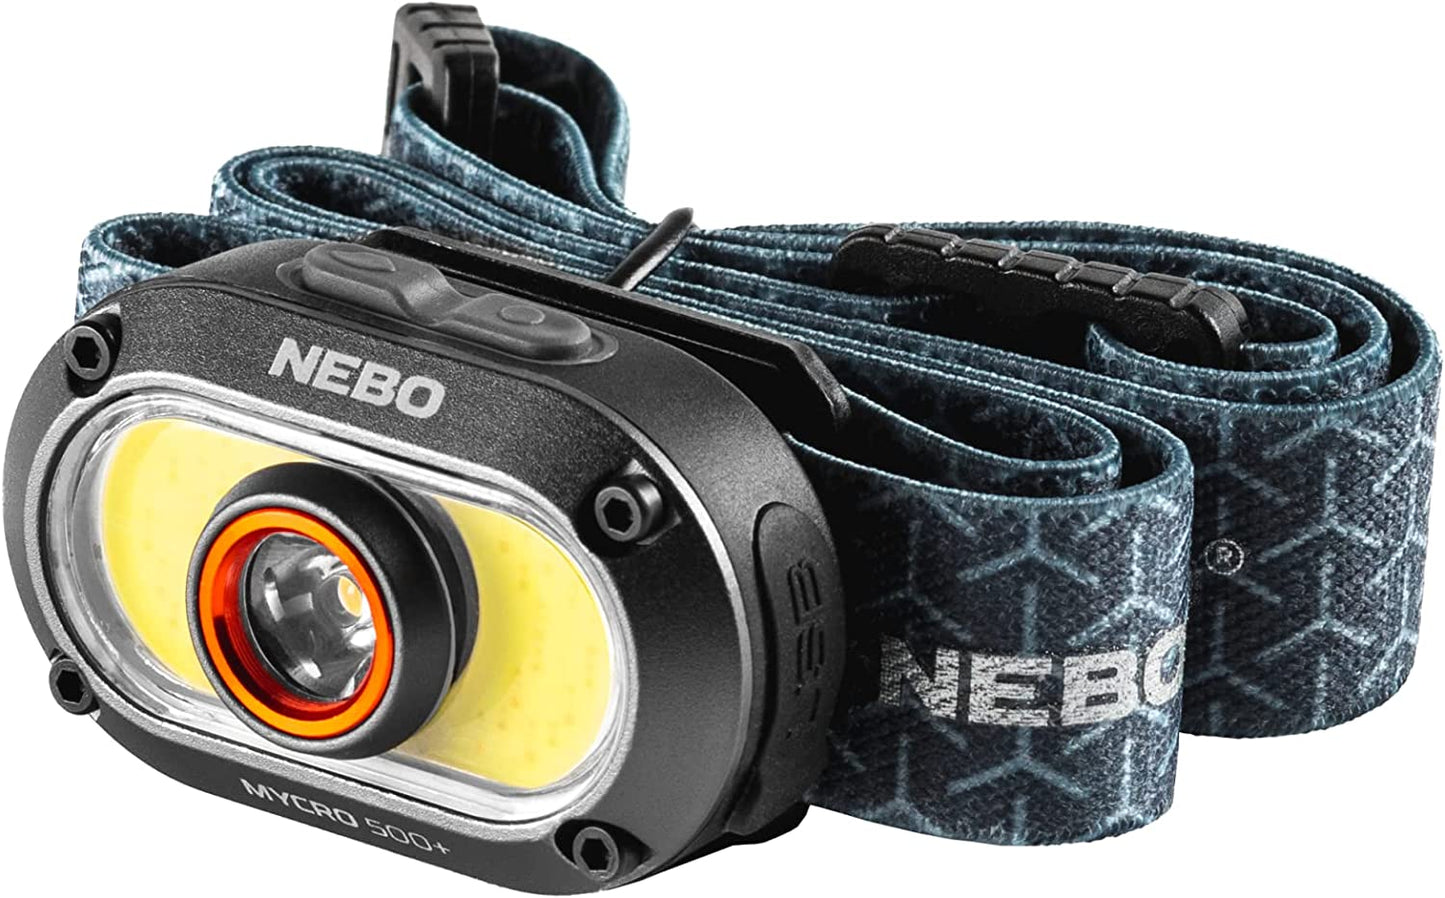 Head lamp with adjustable strap